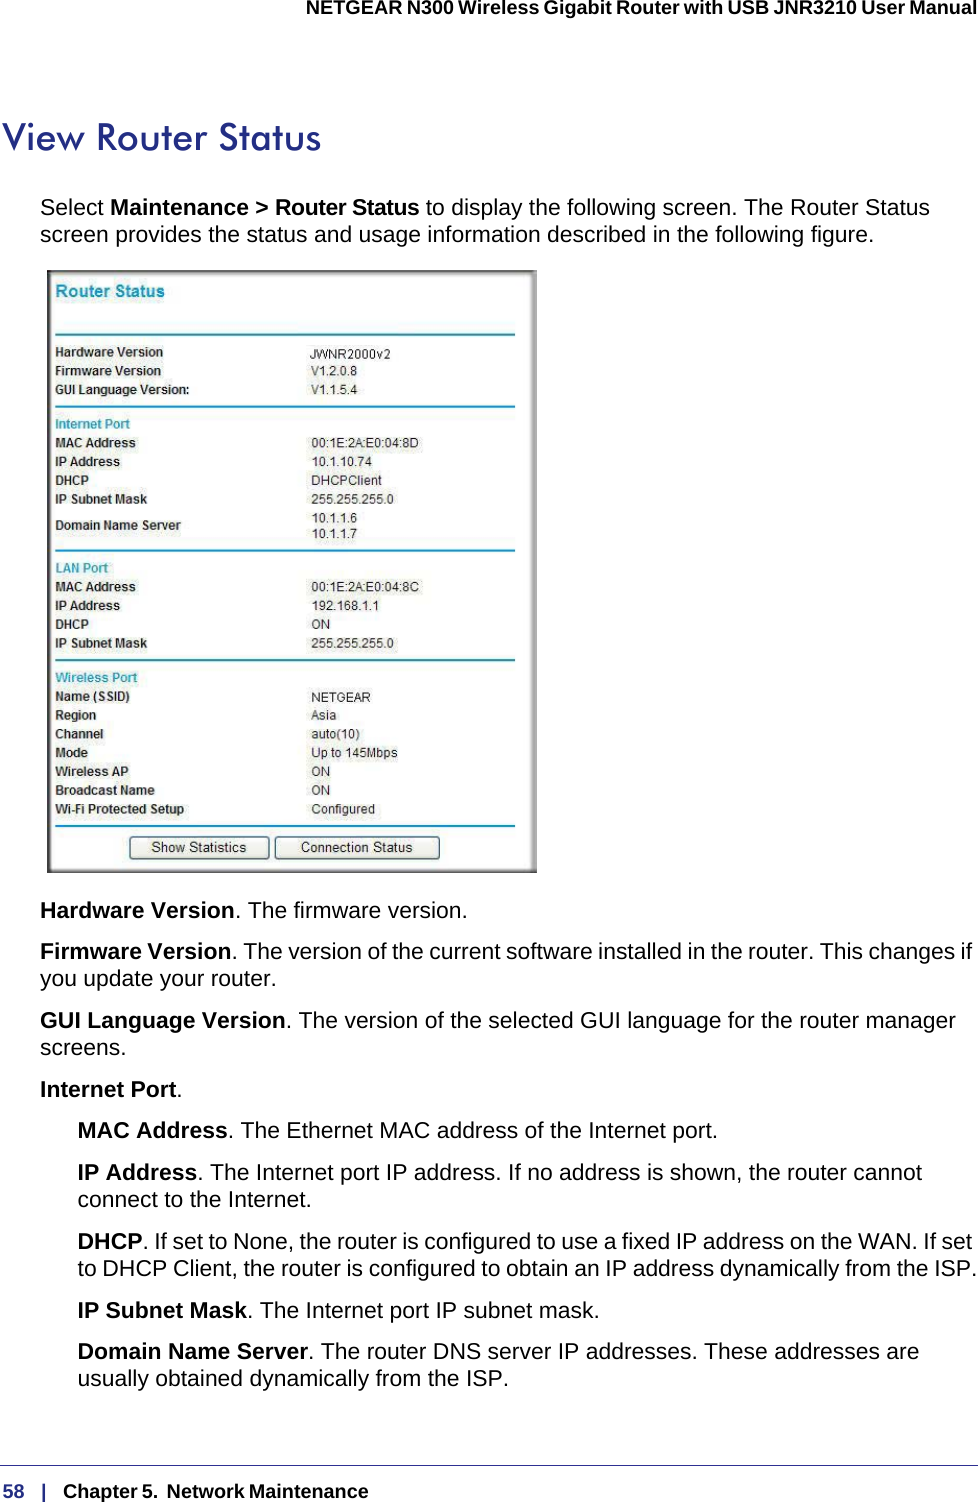 58   |   Chapter 5.  Network Maintenance  NETGEAR N300 Wireless Gigabit Router with USB JNR3210 User Manual View Router StatusSelect Maintenance &gt; Router Status to display the following screen. The Router Status screen provides the status and usage information described in the following figure.Hardware Version. The firmware version.Firmware Version. The version of the current software installed in the router. This changes if you update your router.GUI Language Version. The version of the selected GUI language for the router manager screens. Internet Port.MAC Address. The Ethernet MAC address of the Internet port.IP Address. The Internet port IP address. If no address is shown, the router cannot connect to the Internet.DHCP. If set to None, the router is configured to use a fixed IP address on the WAN. If set to DHCP Client, the router is configured to obtain an IP address dynamically from the ISP.IP Subnet Mask. The Internet port IP subnet mask.Domain Name Server. The router DNS server IP addresses. These addresses are usually obtained dynamically from the ISP.